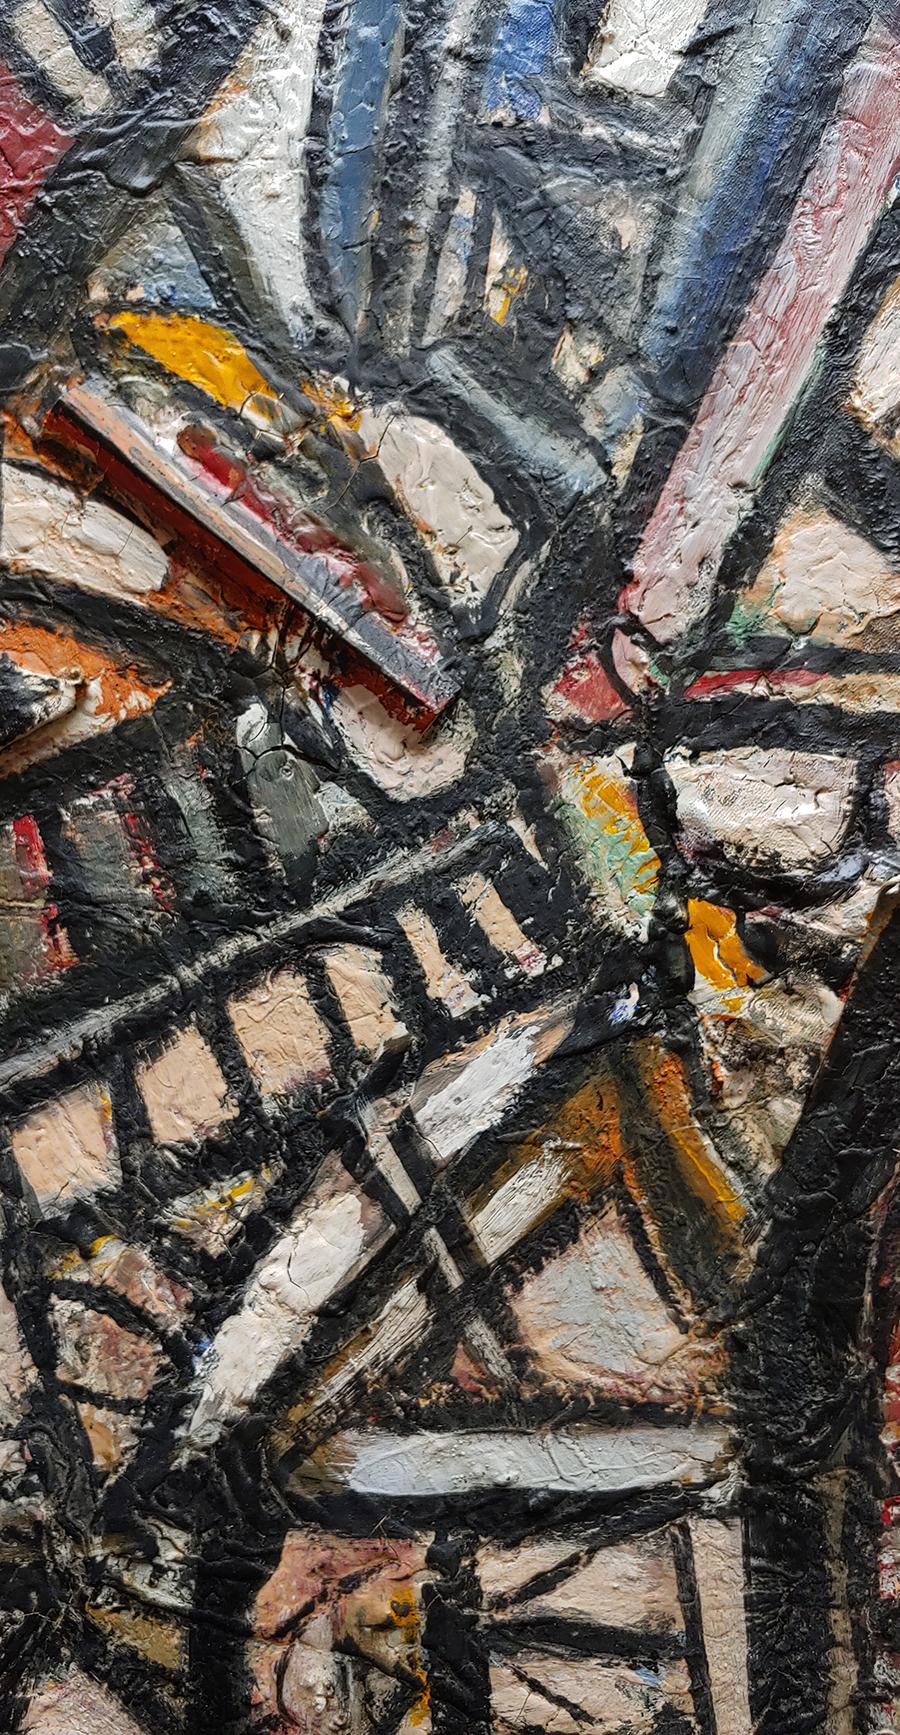  A 2010 documentary on Harald focused on his impressive exhibition in the Chelsea art district of New York City.

In this heavily textured abstract painting, Harald M. Olson uses oil, acrylic, plaster, wood and latex paint to create movement and